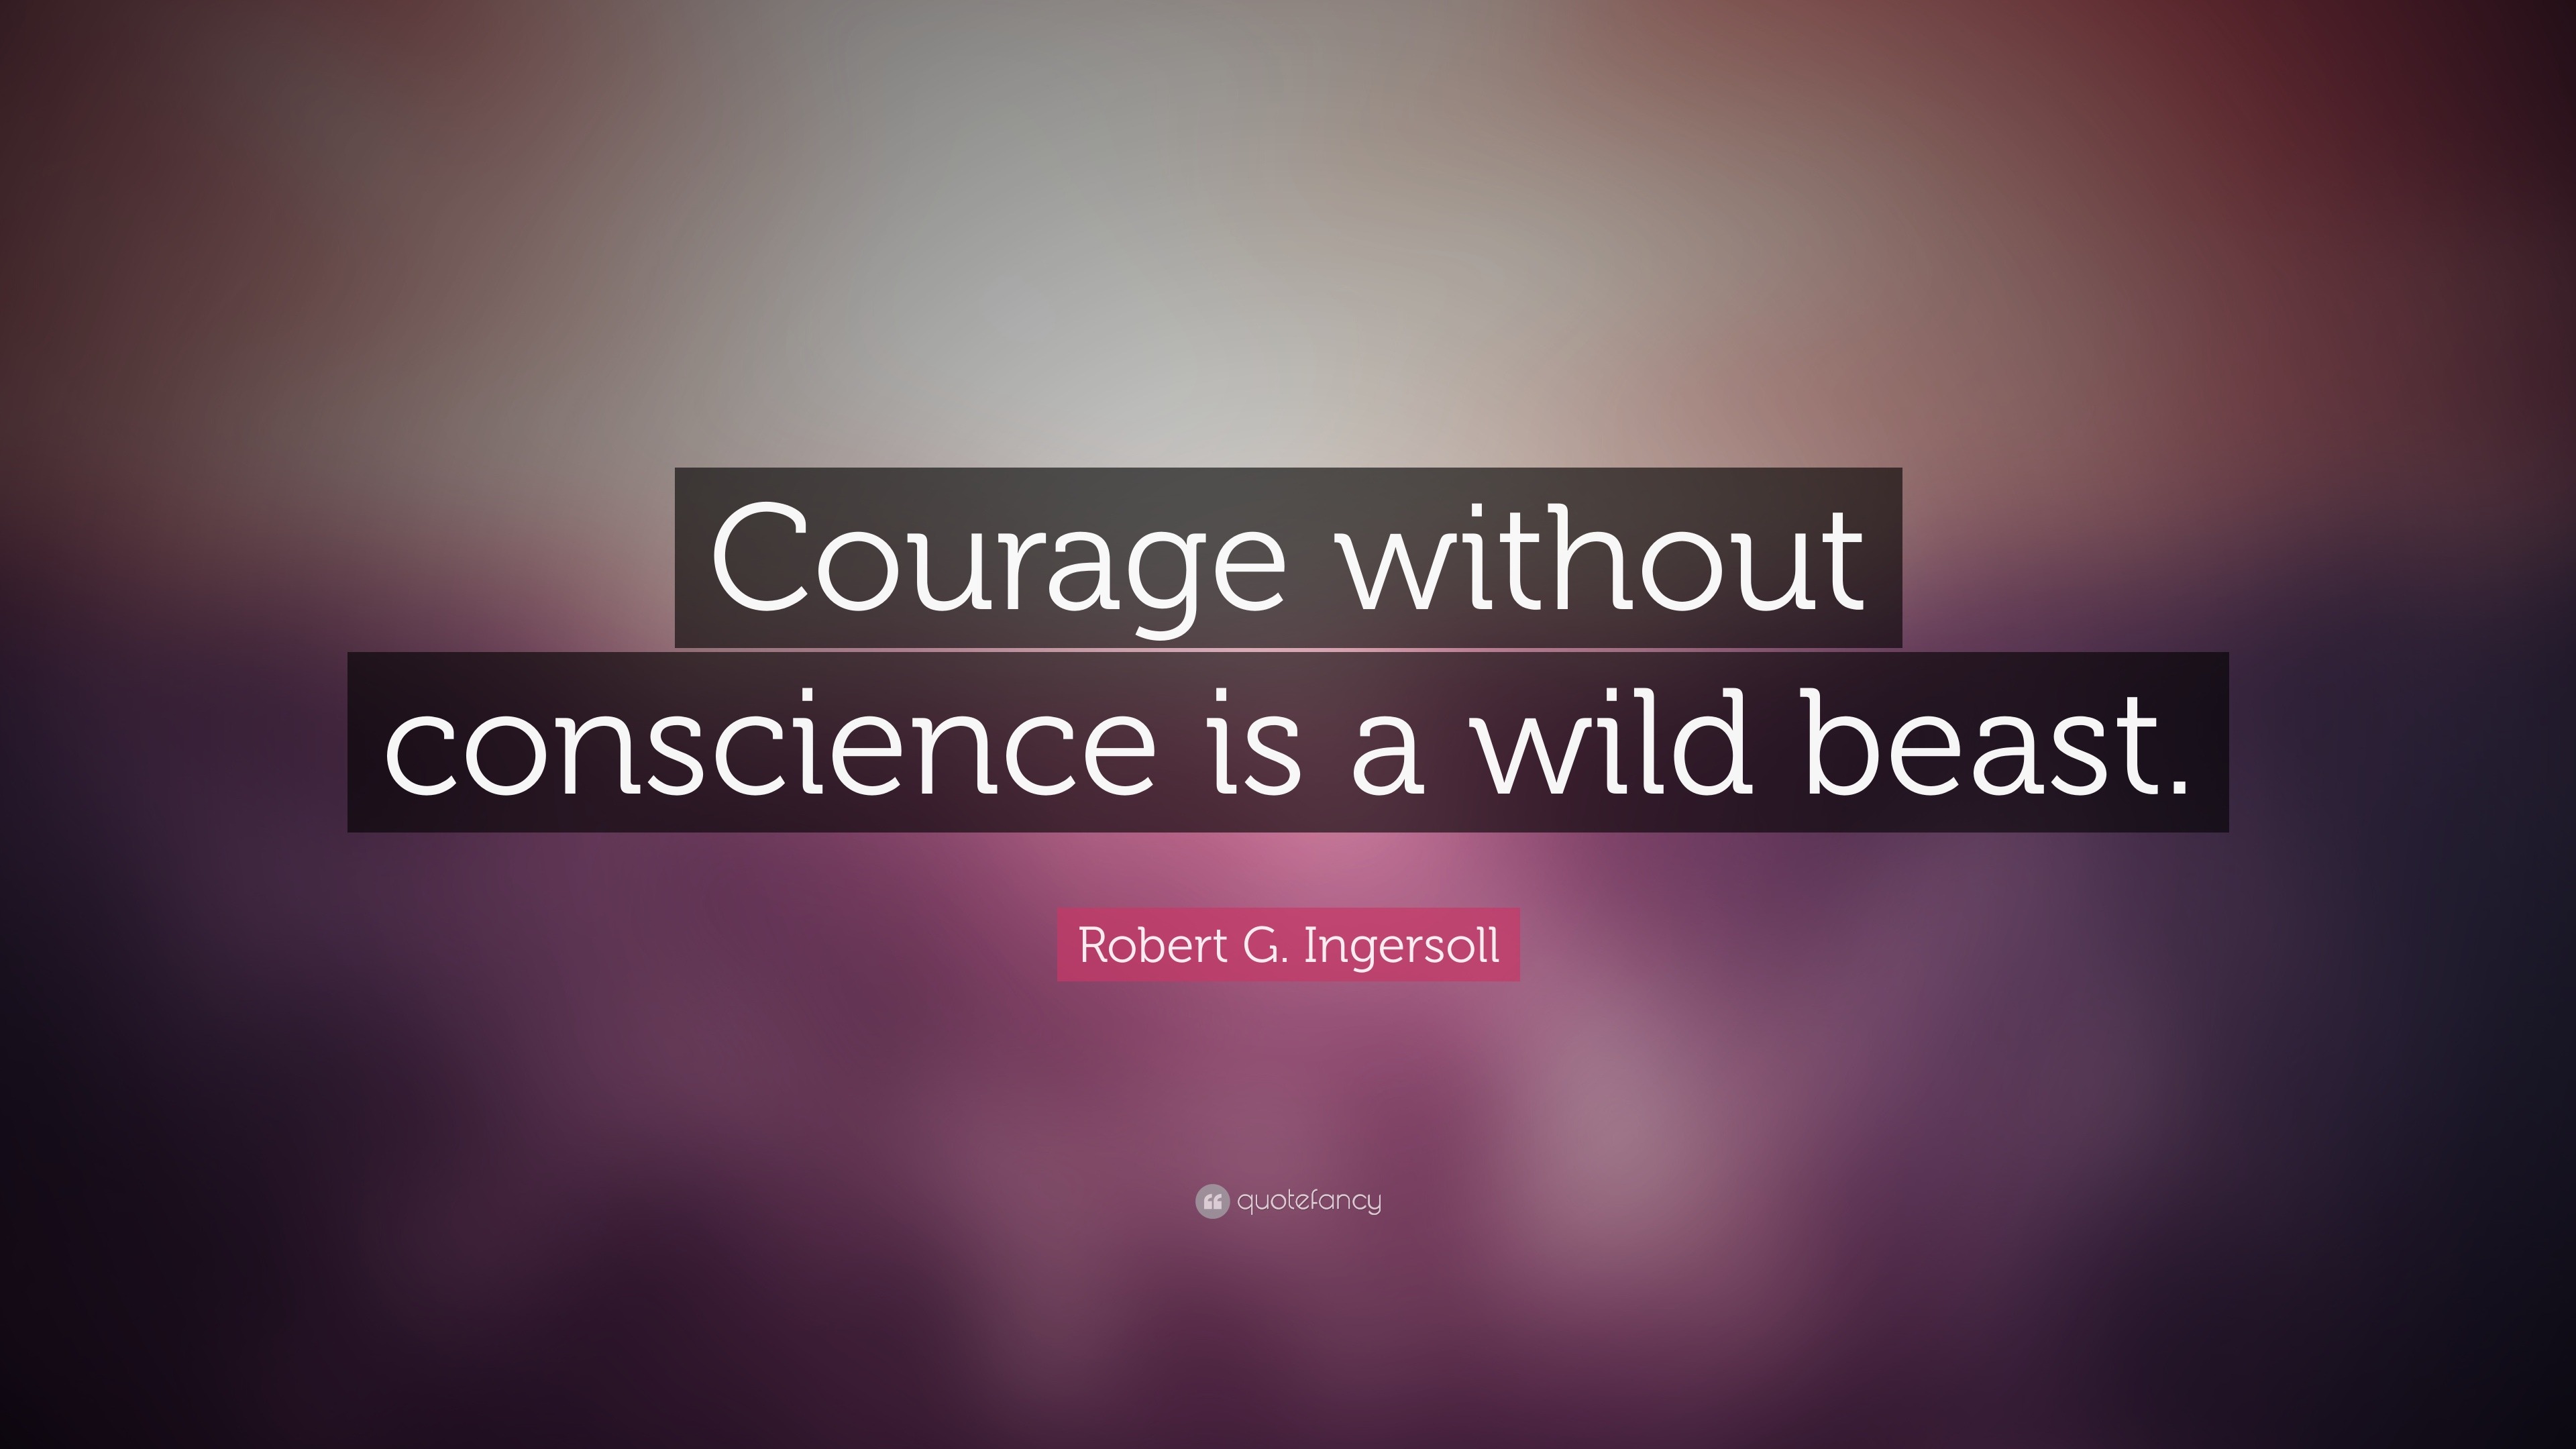 Robert G Ingersoll Quote “Courage without conscience is a wild beast ”